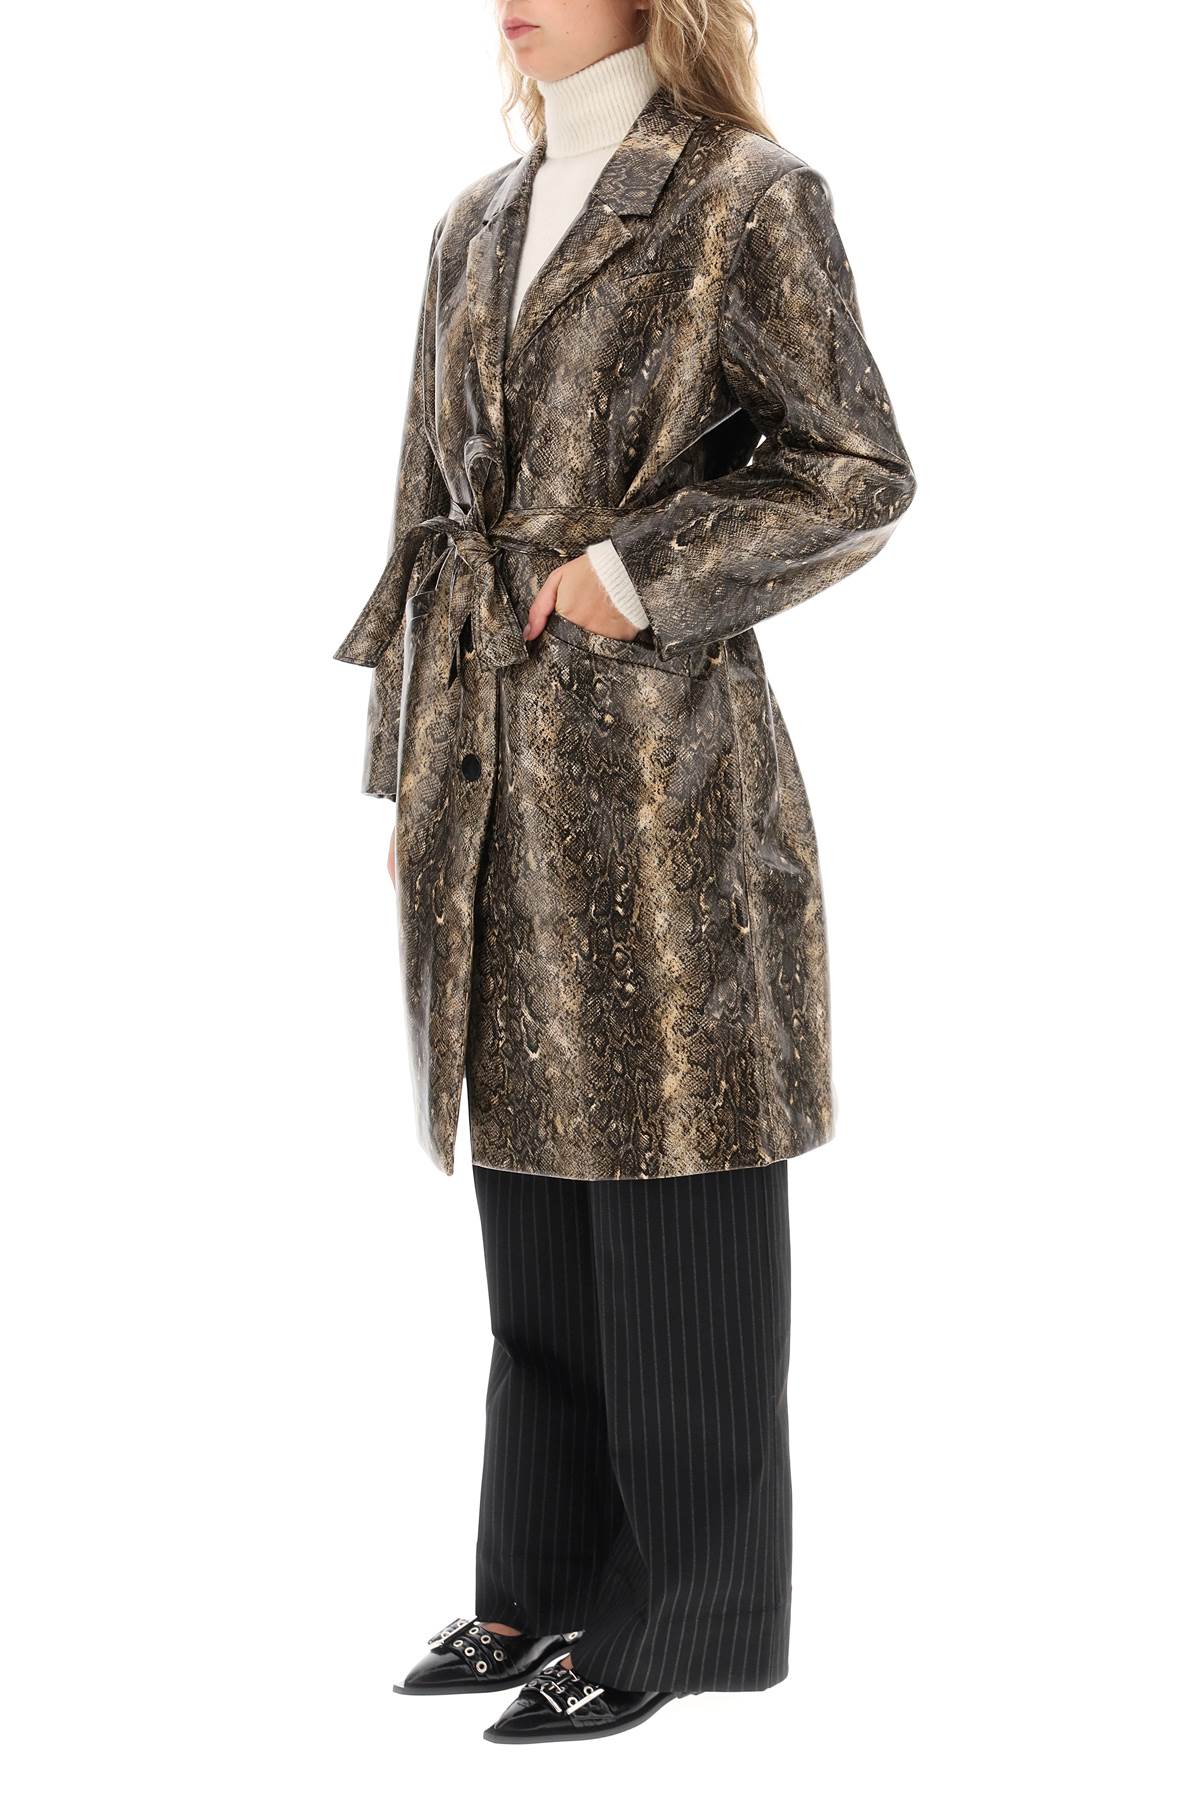 Ganni snake-effect faux leather trench coat-3